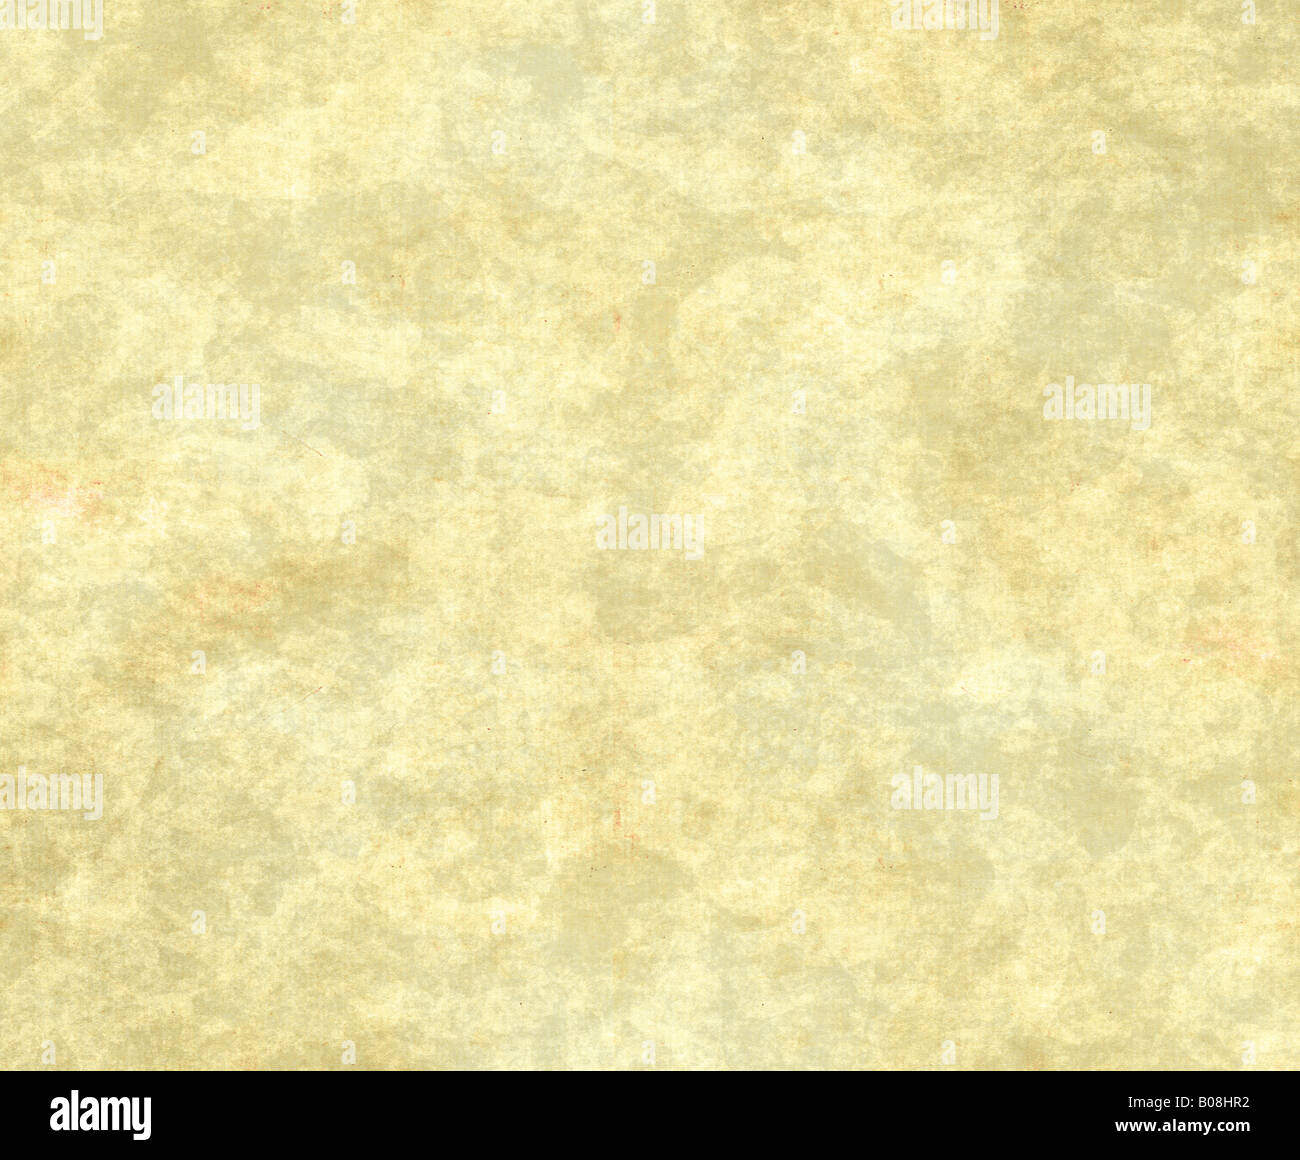 large old paper or parchment background texture Stock Photo